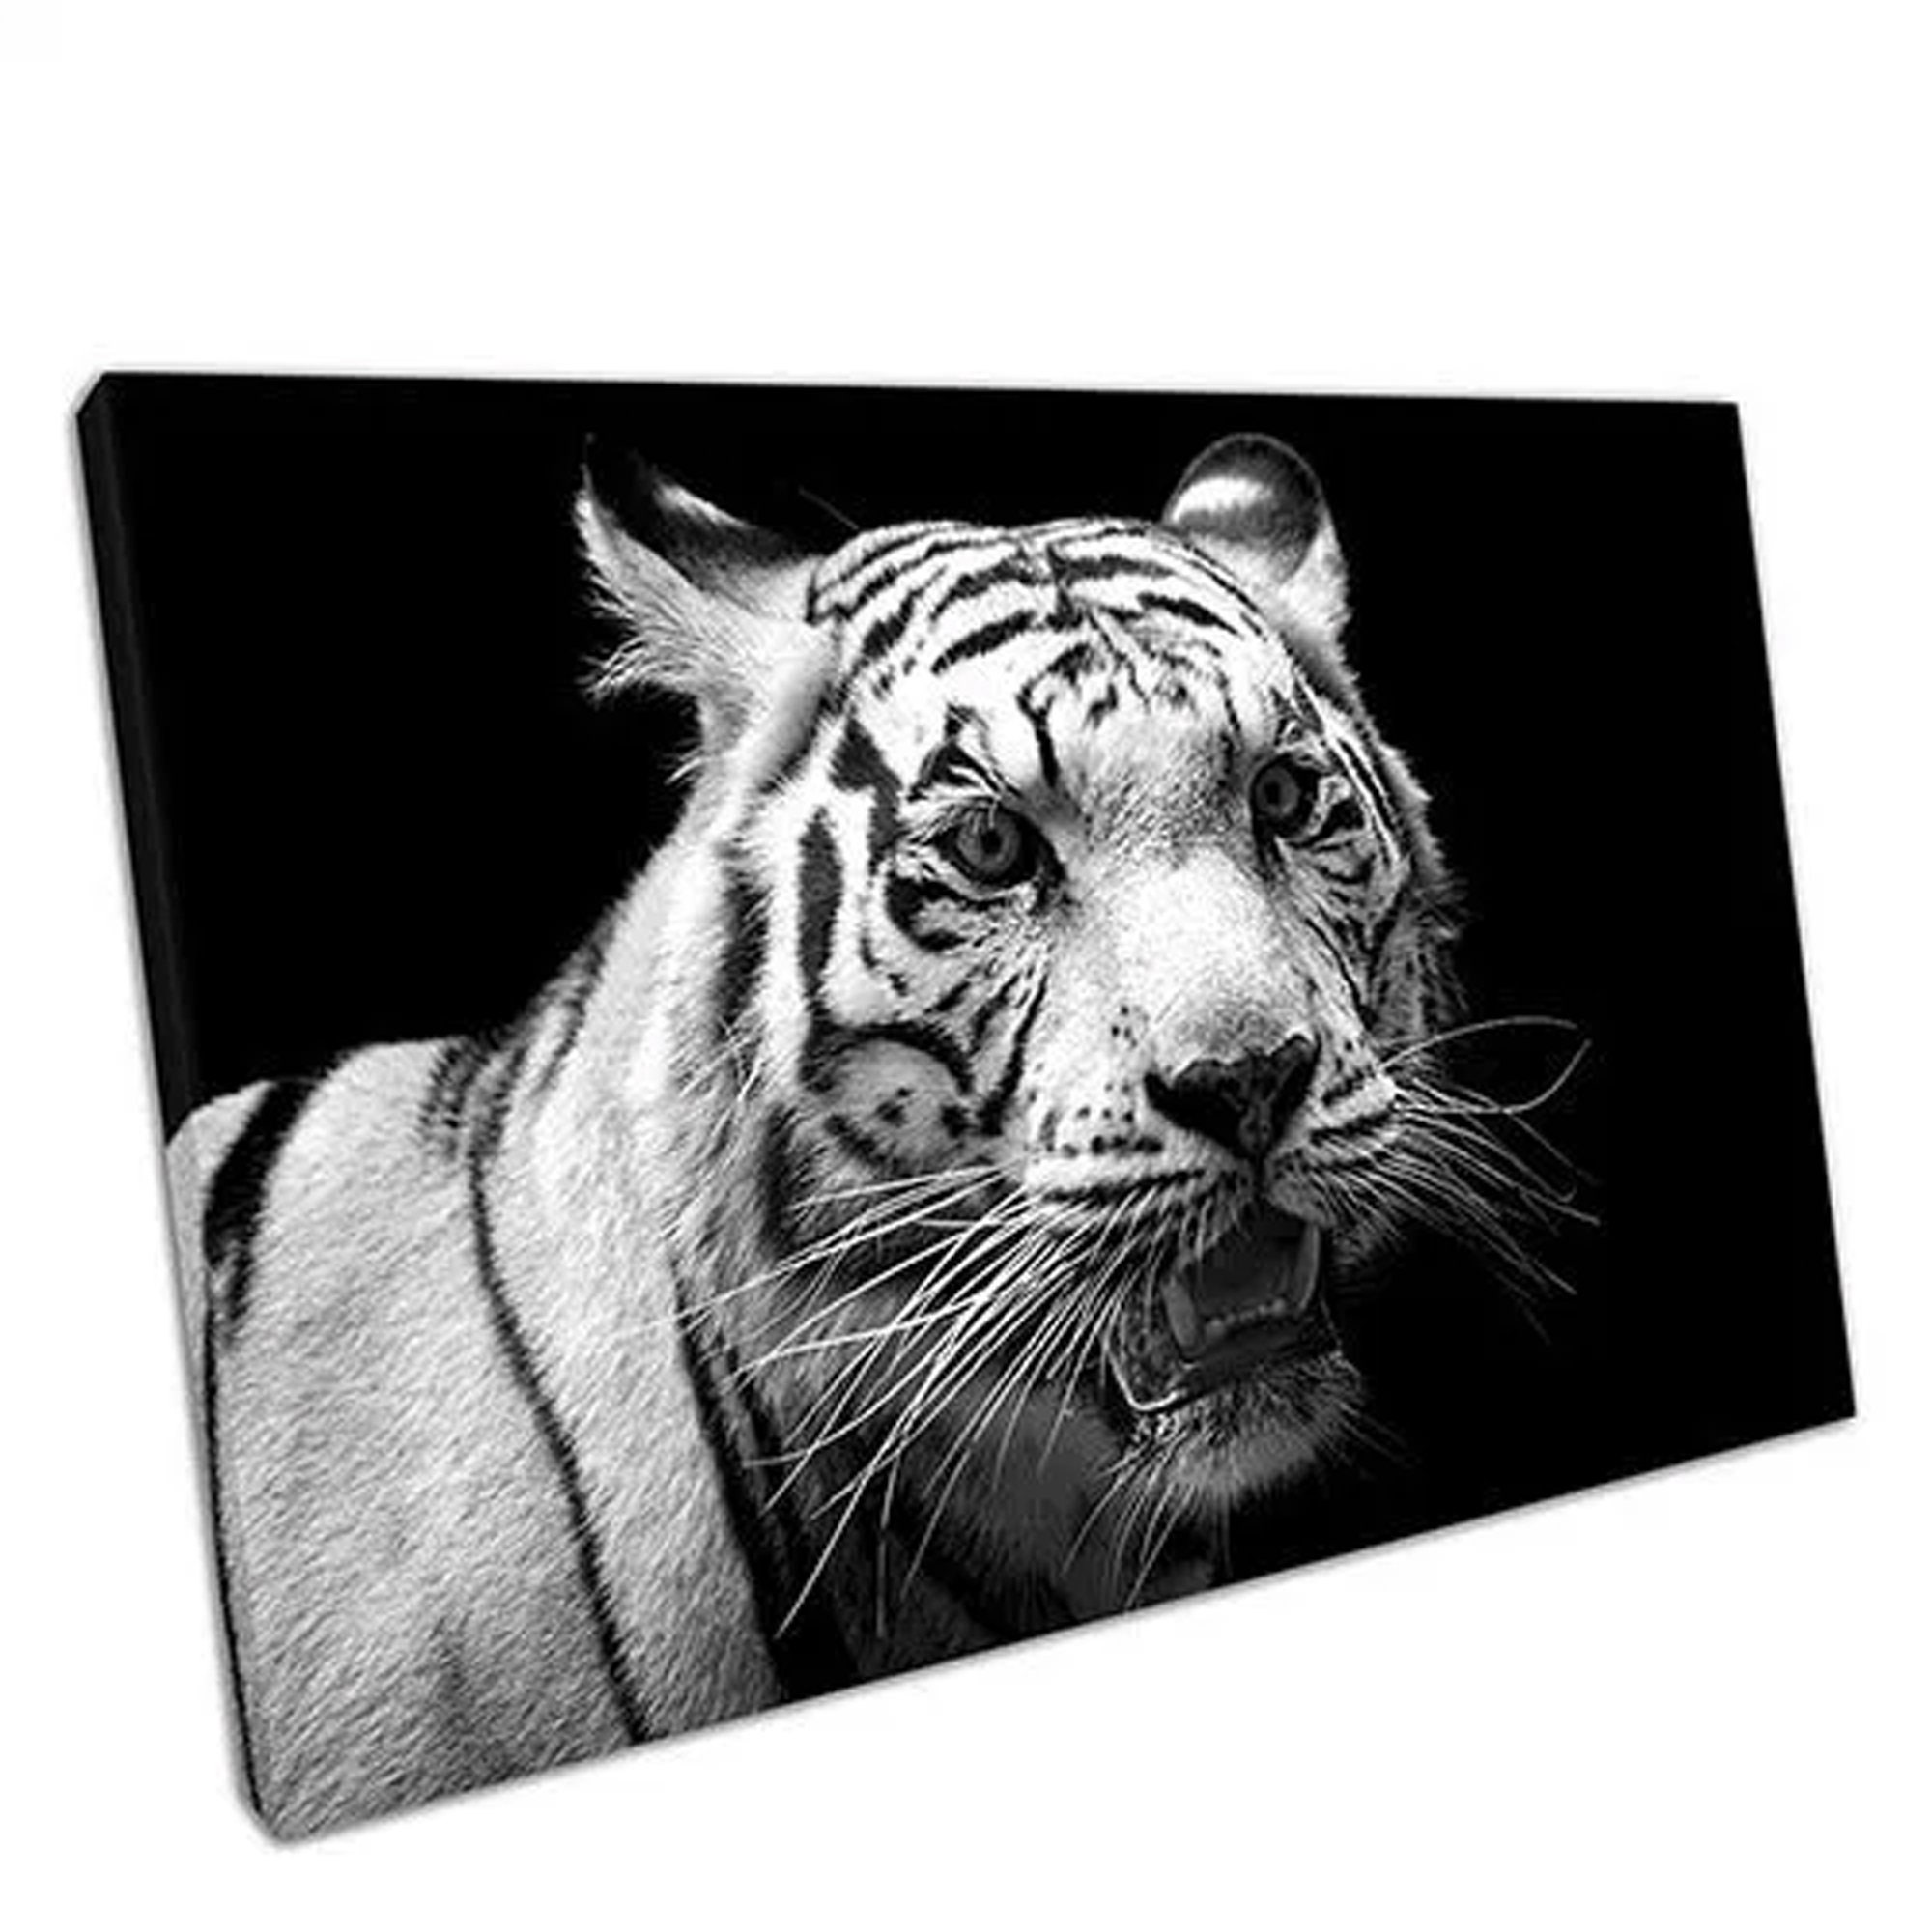 Black & White Abstract Tiger Canvas Wall Art Picture Print A2 A0 A1 